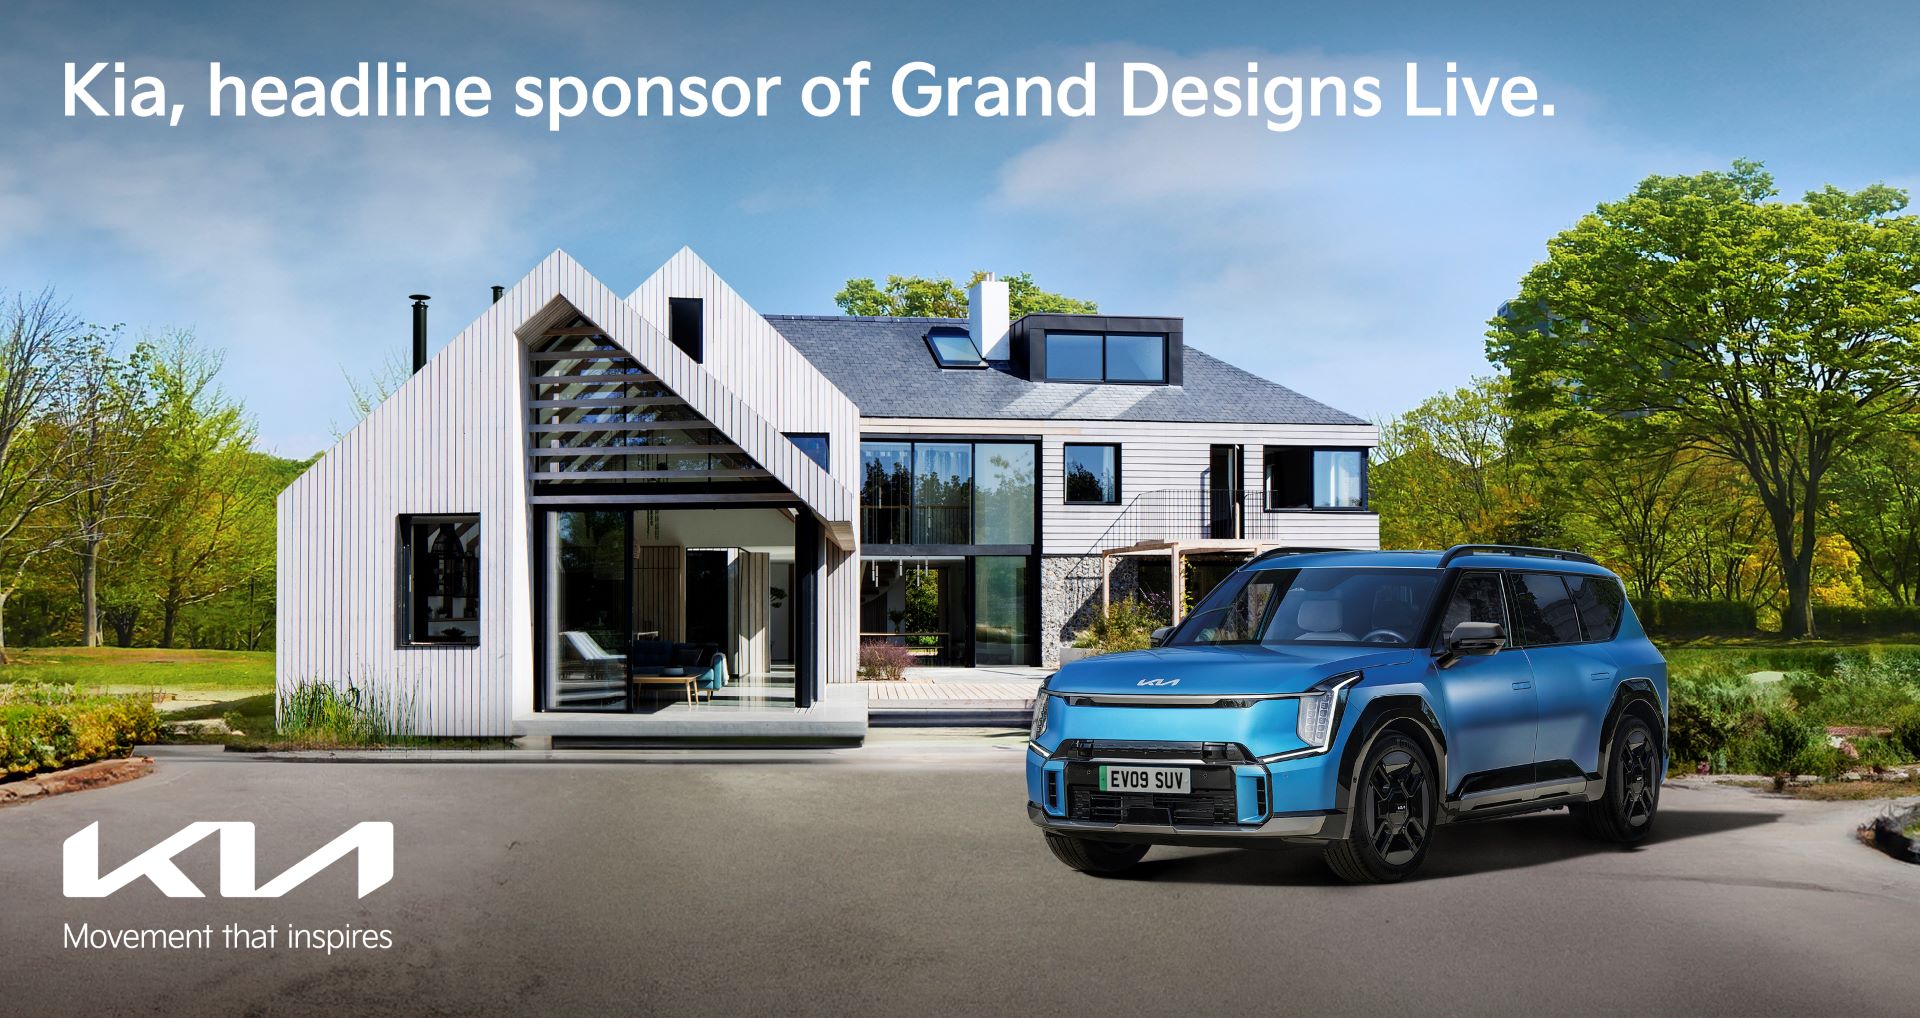 Kia Energizes Grand Designs Live as Primary Sponsor in London’s ExCeL